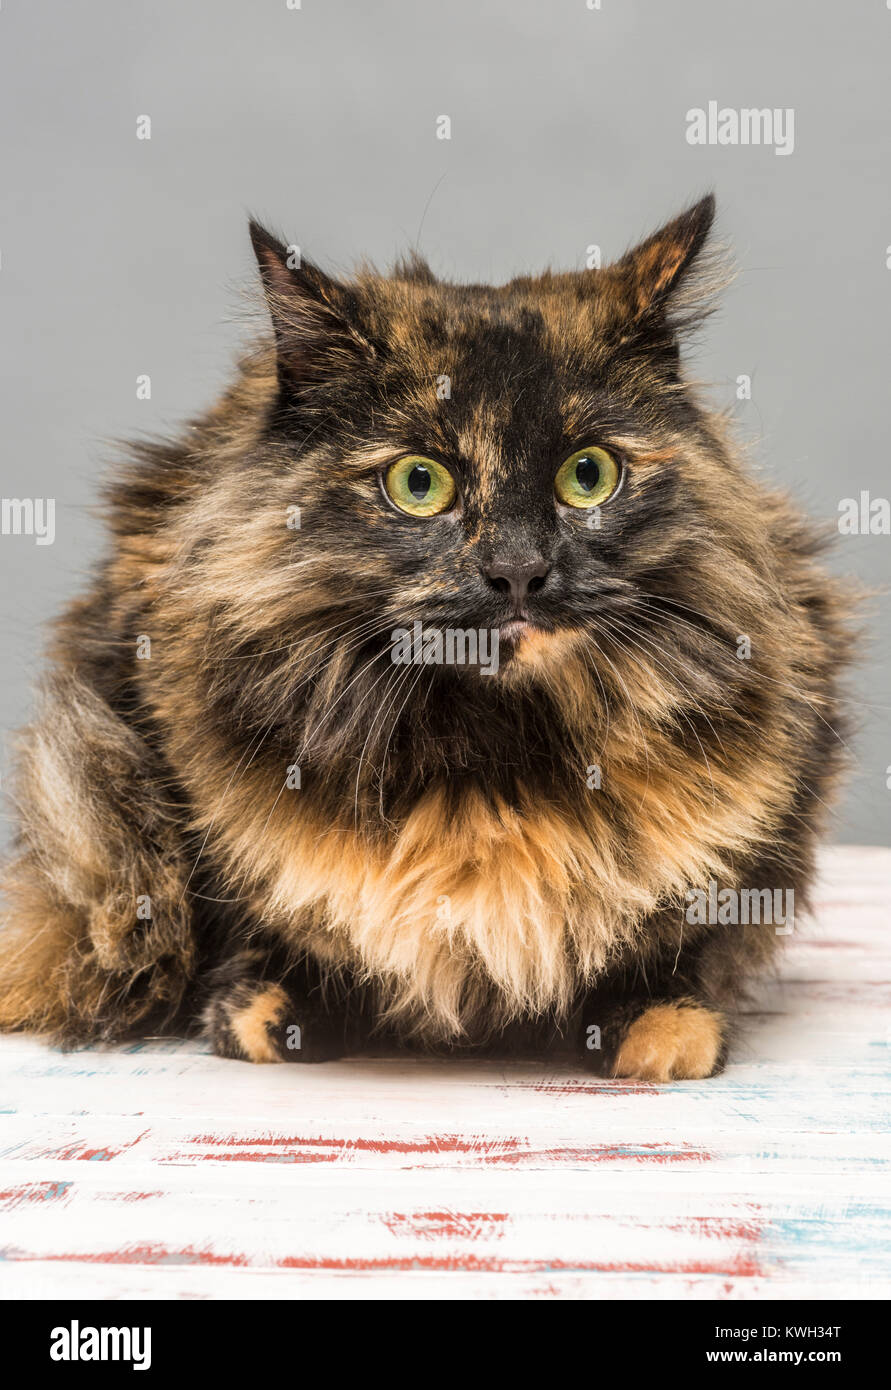 Long haired domestic tabby cat Stock Photo